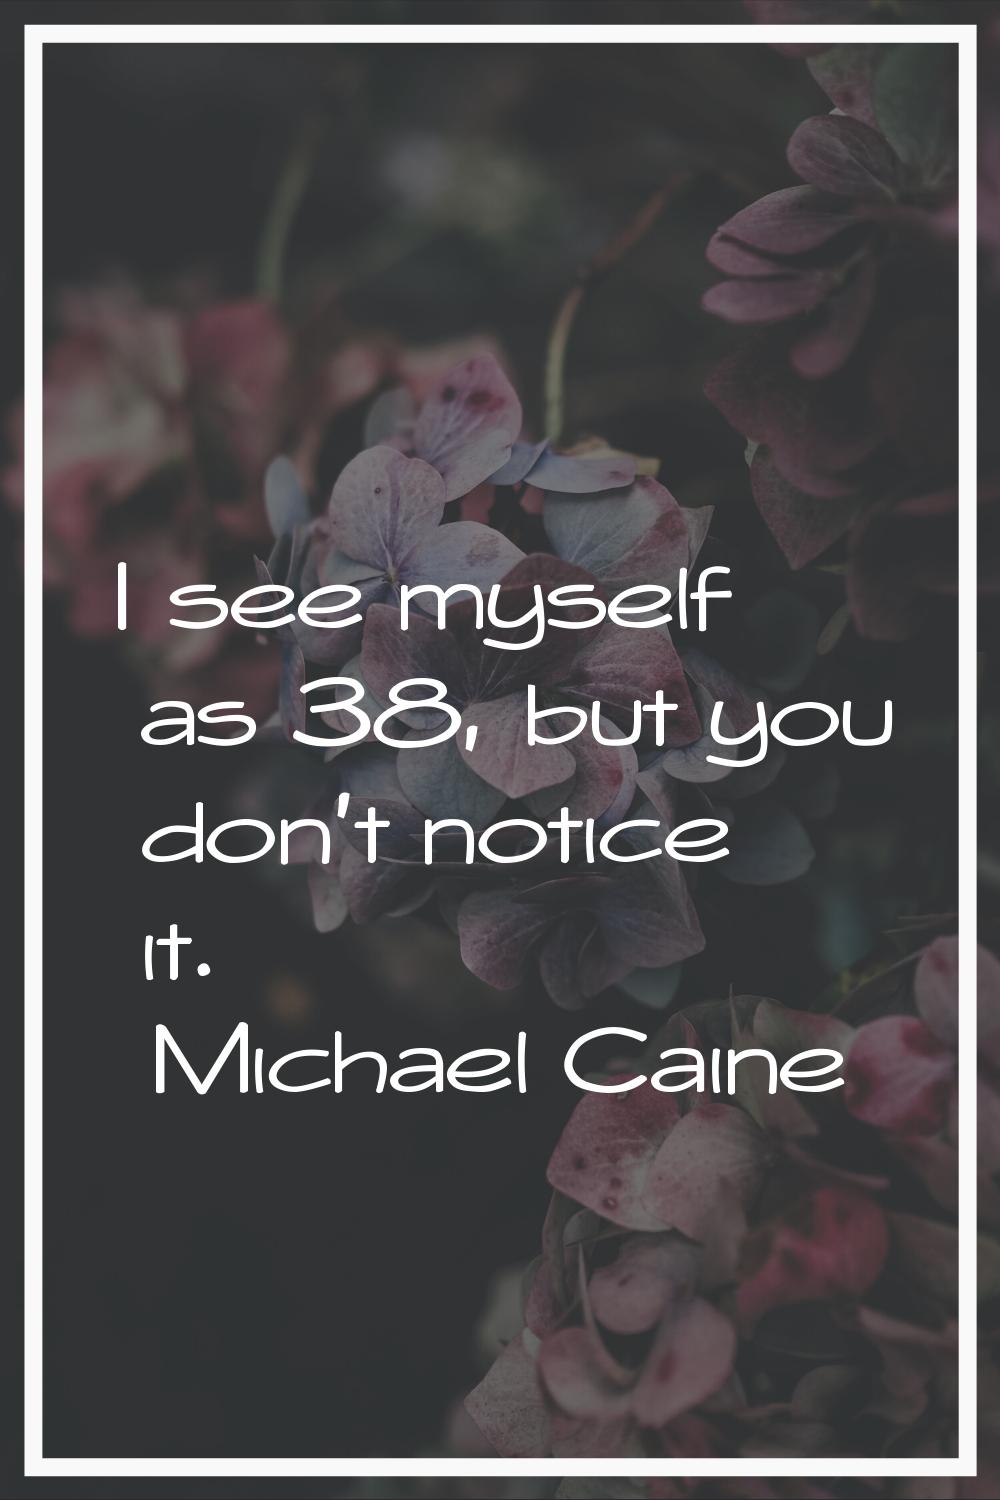 I see myself as 38, but you don't notice it.